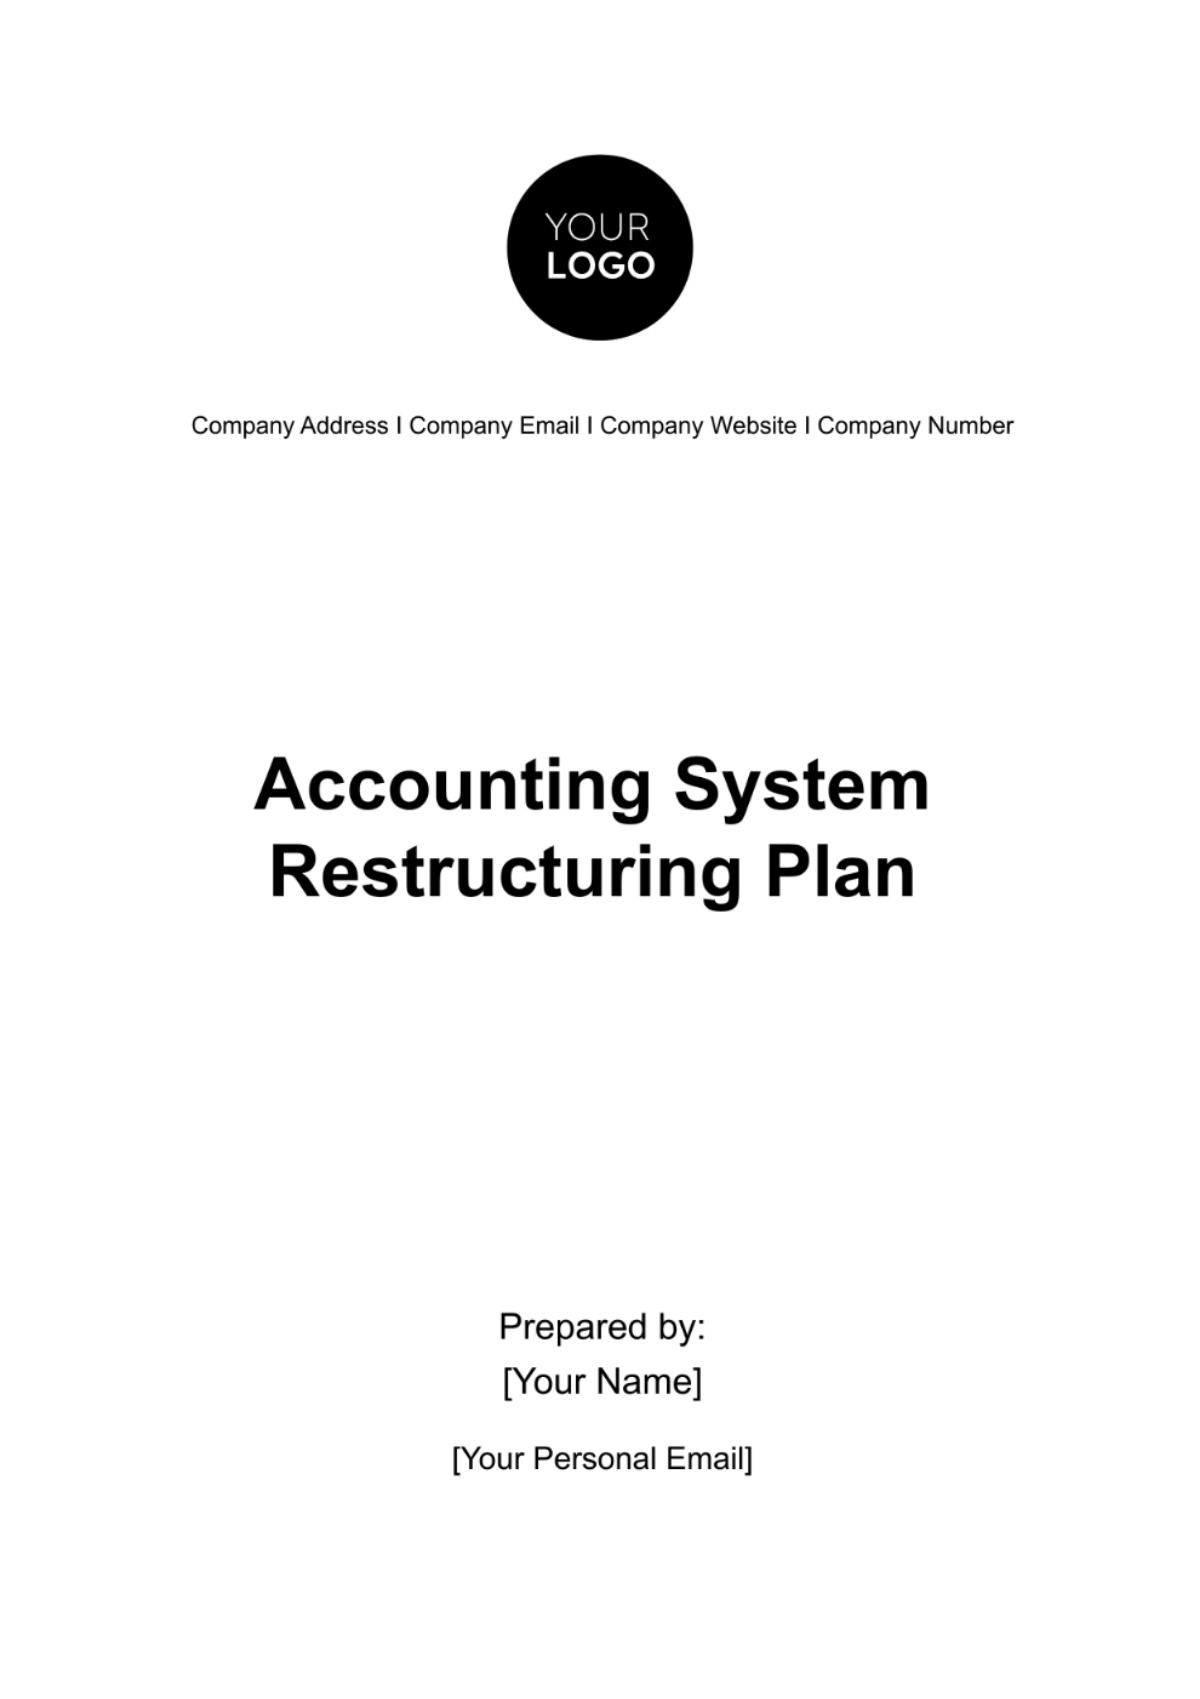 Free Accounting System Restructuring Plan Template